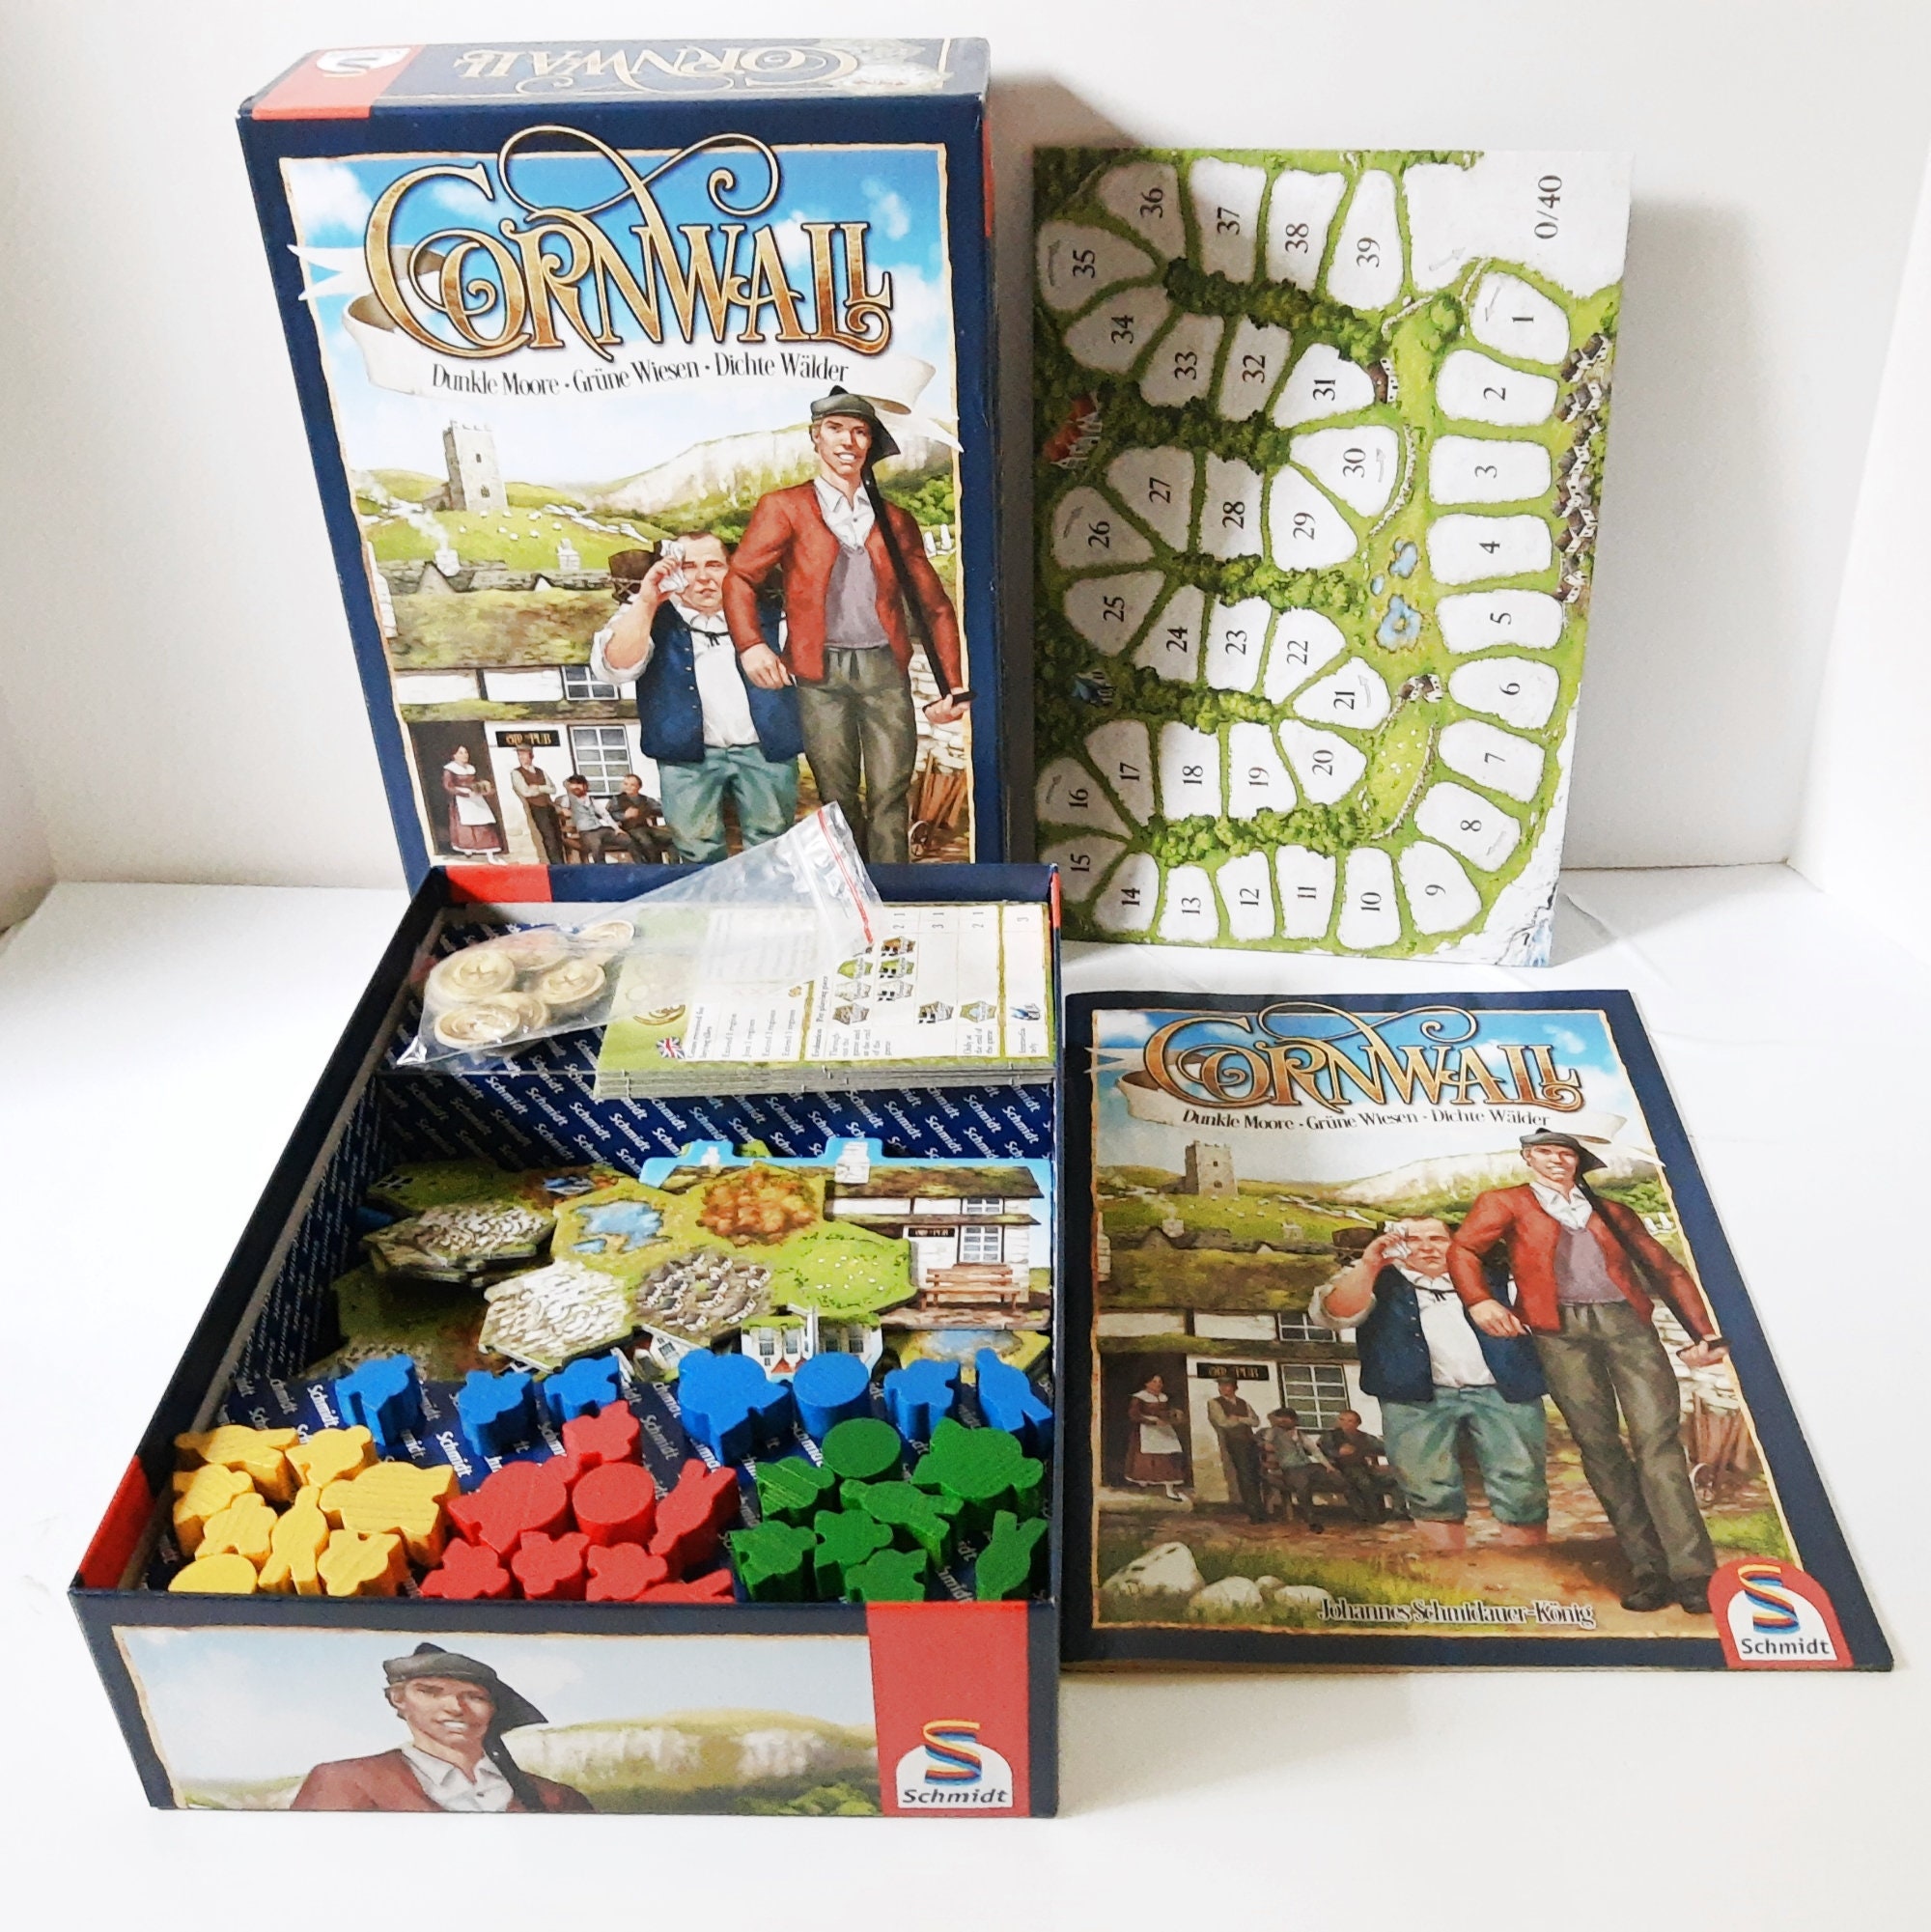 Schmidt Solitaire Game International Version Made in Germany for sale online